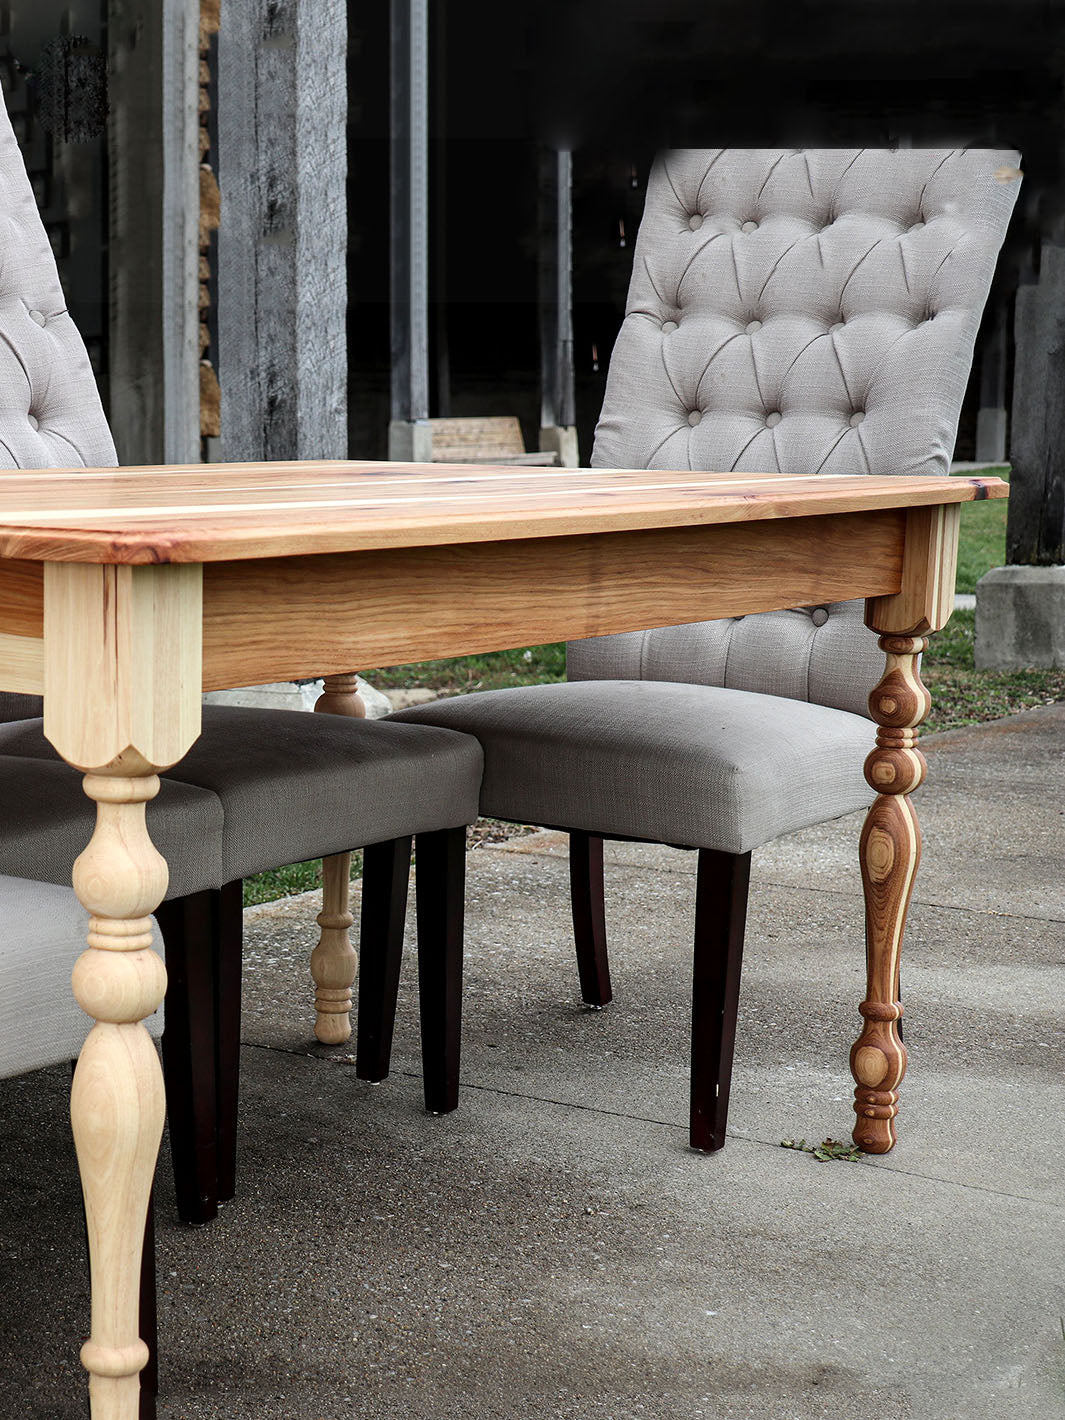 Narrow Hickory Farmhouse Dining Table with Turned Legs Earthly Comfort Dining Tables 1376-3